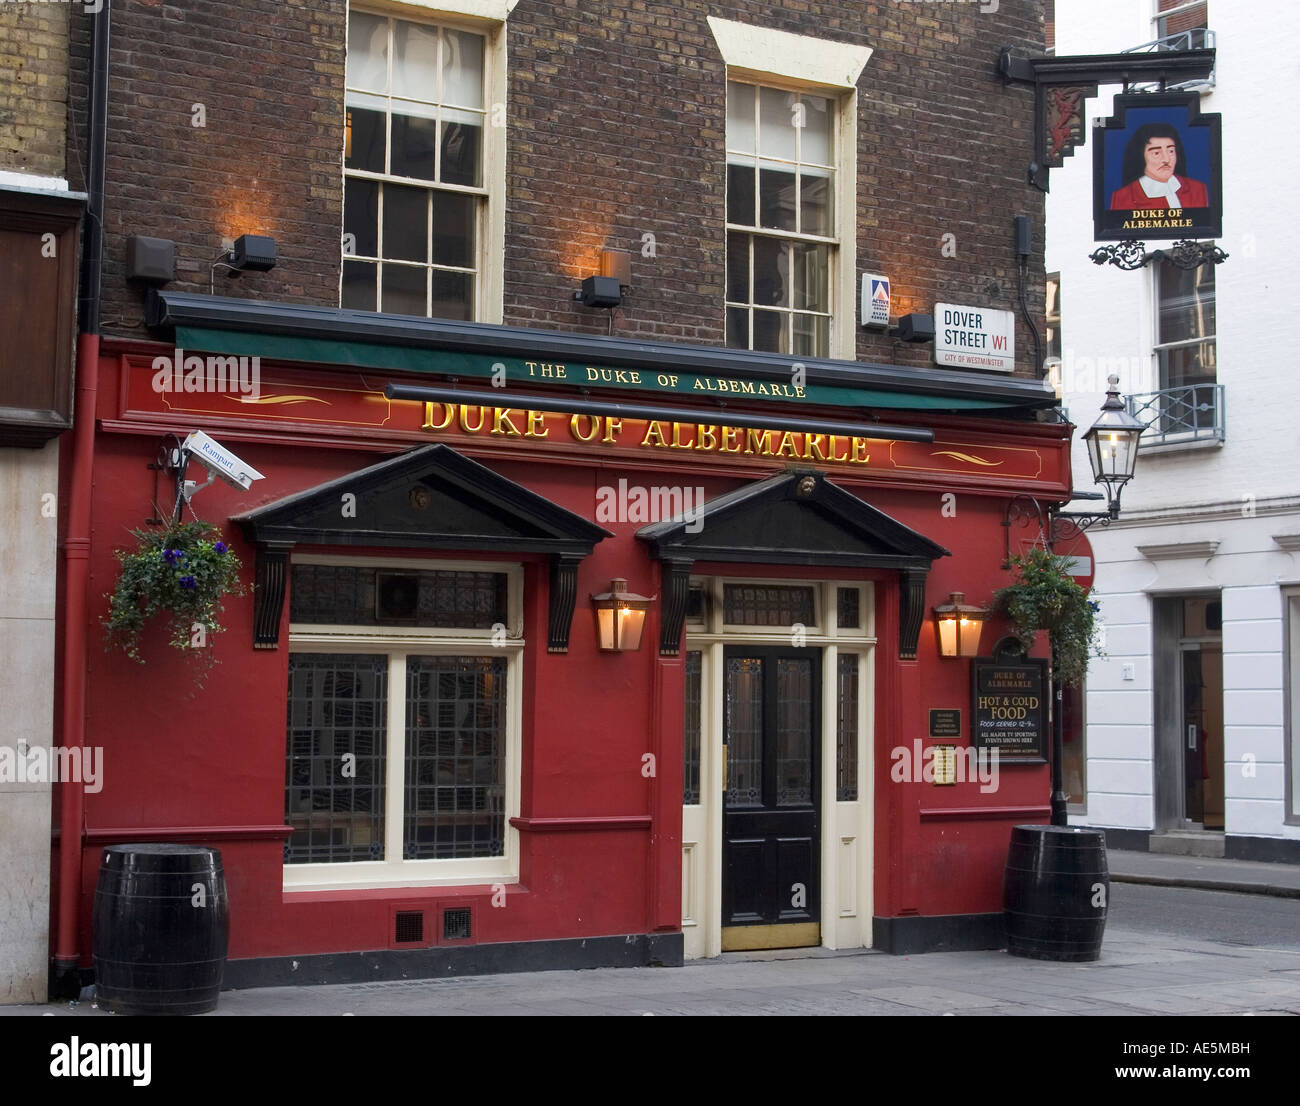 Duke of Albemarle in London, England. The establishment was formerly a pub and is now a boutique. Stock Photo